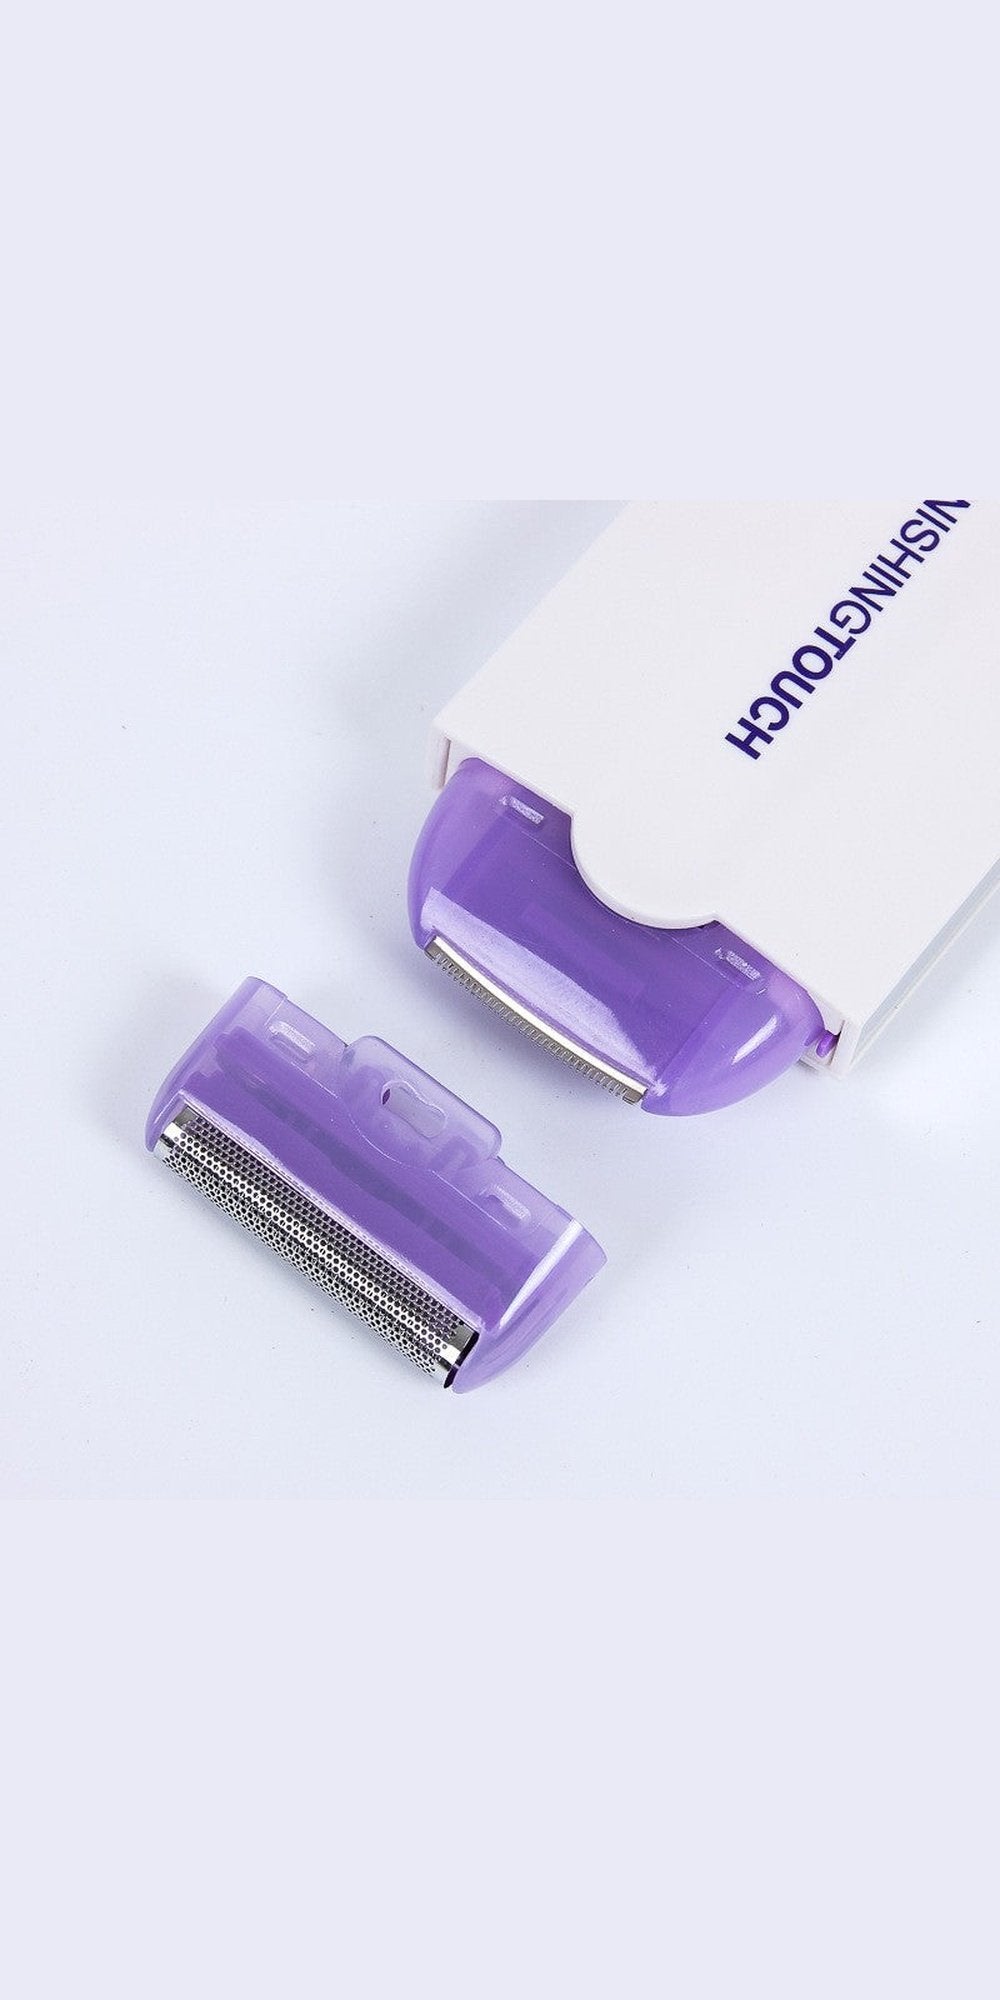 Discover Effortless Beauty with Our Pain-Free Hair Remover